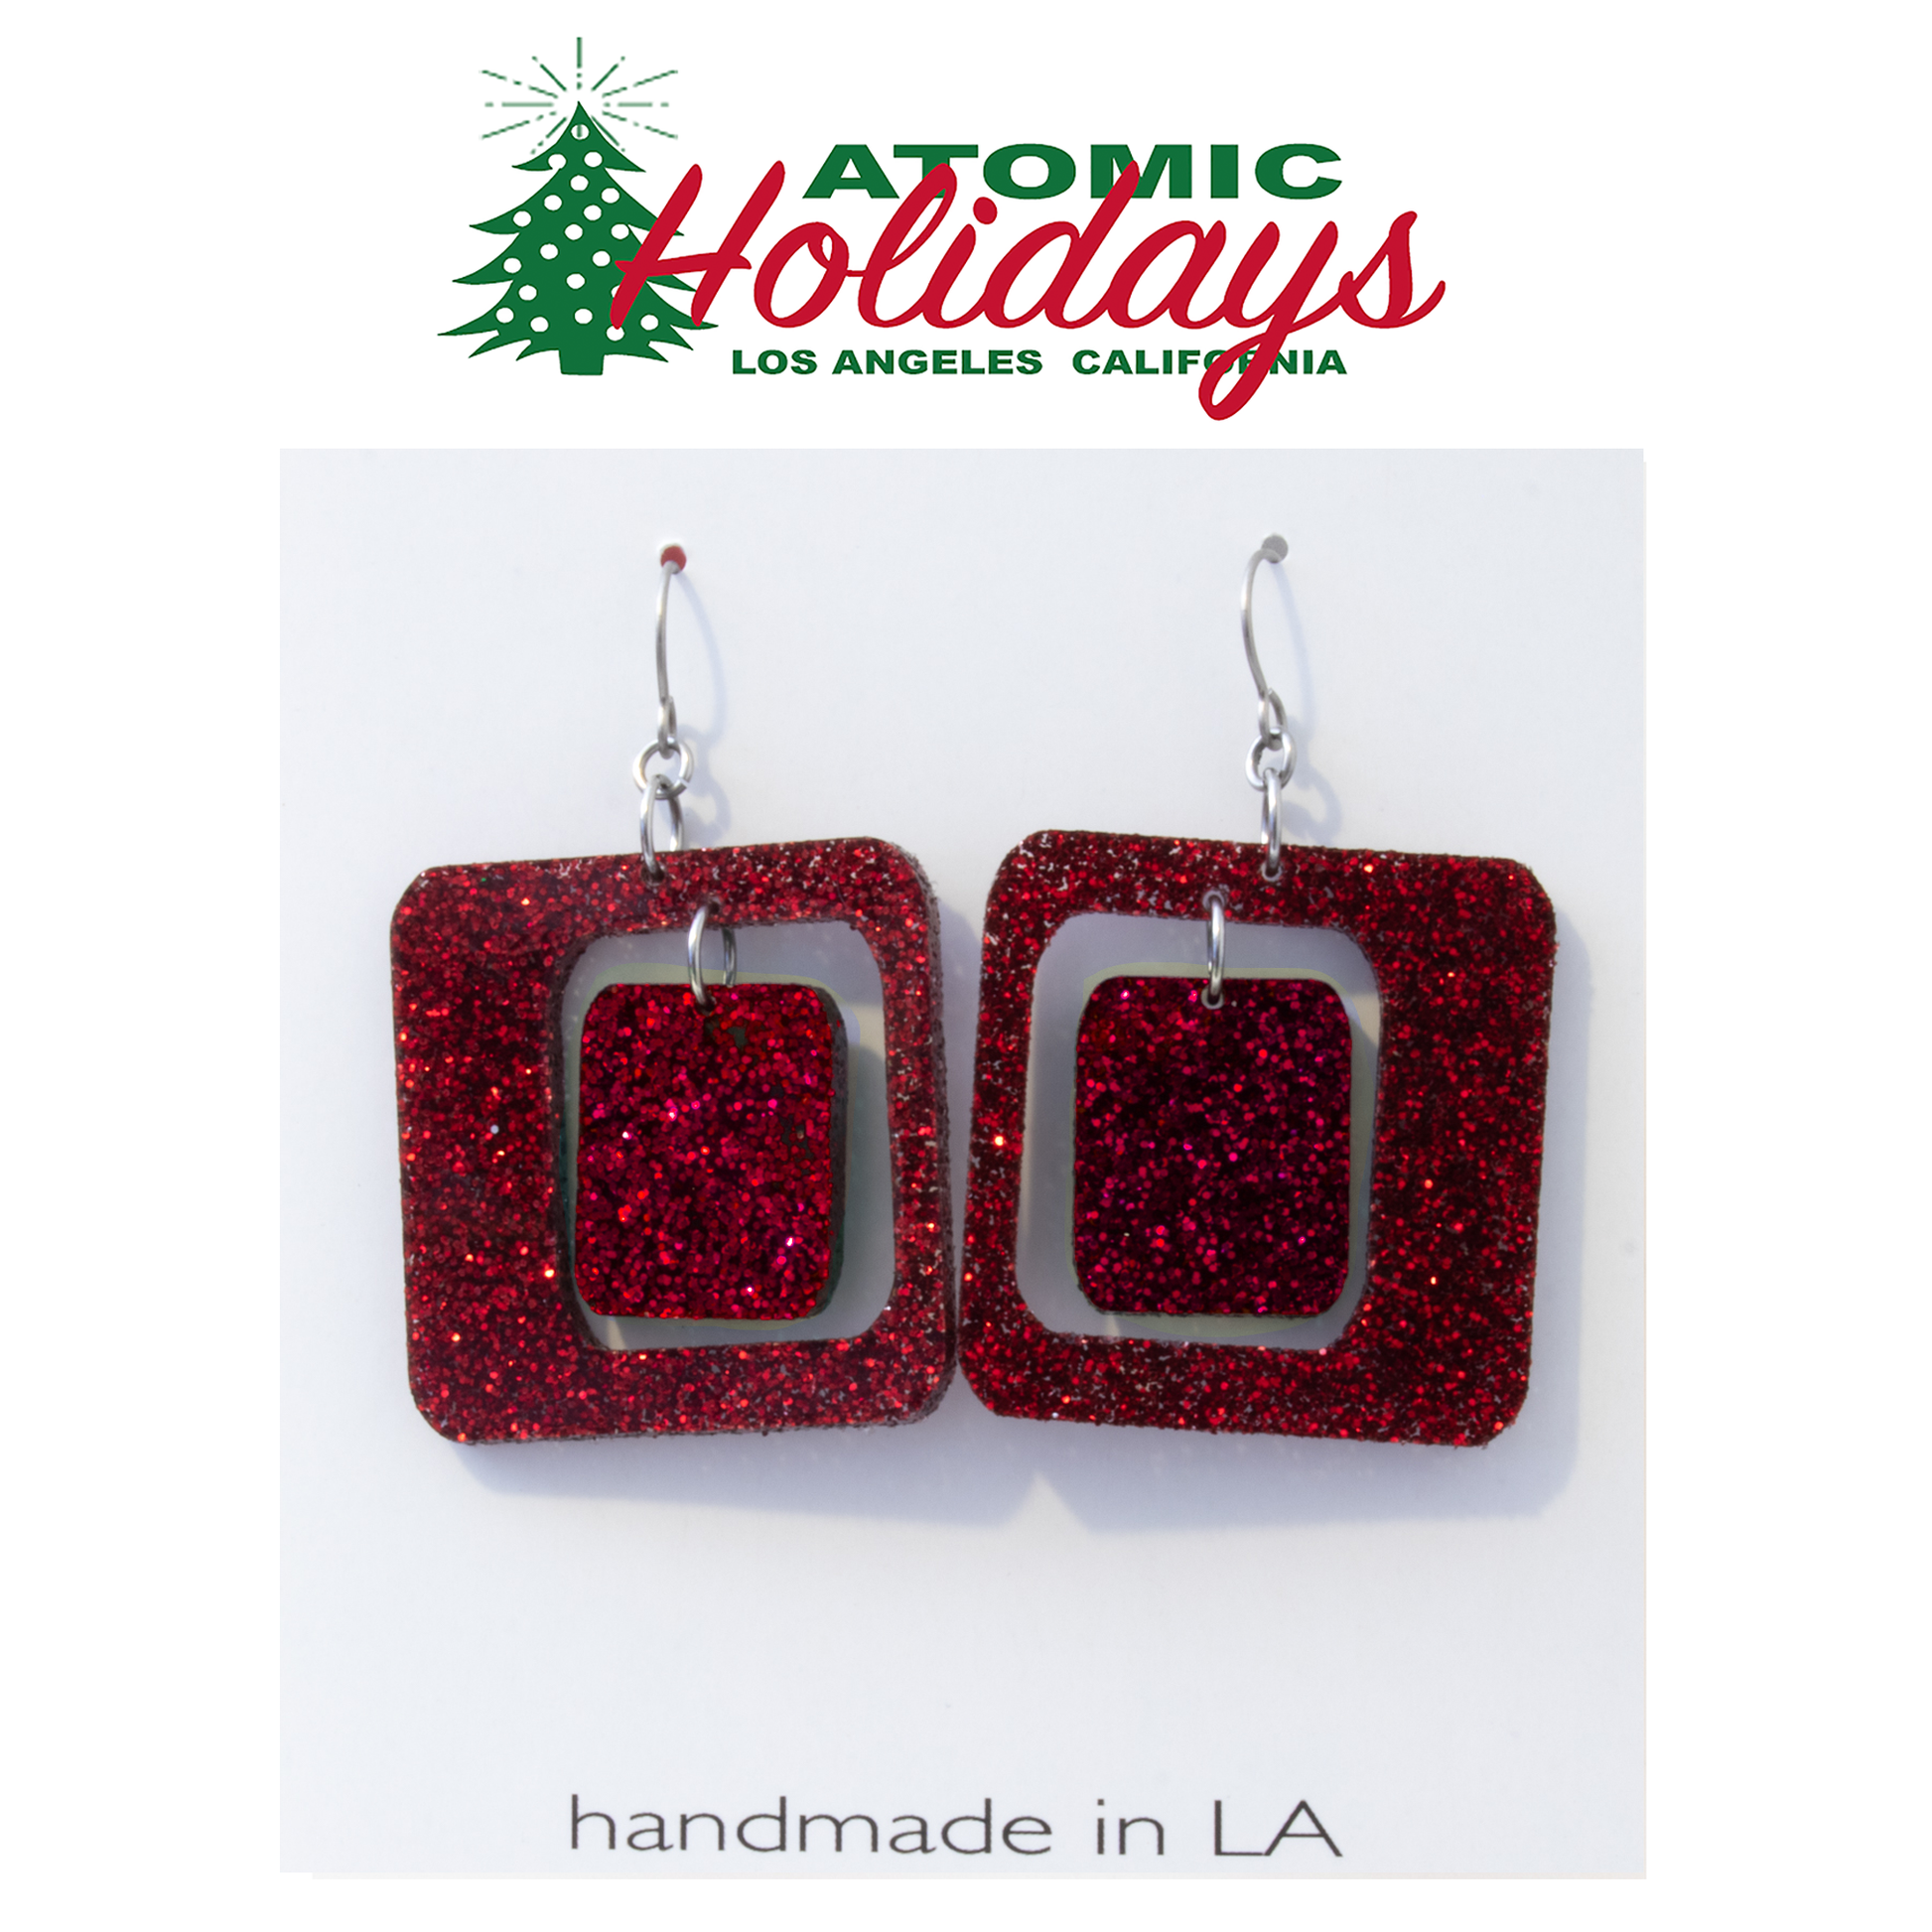 Atomic Holidays Statement Christmas Earrings in Glitter Red - mid century modern Coolsville style by AtomicMobiles.com